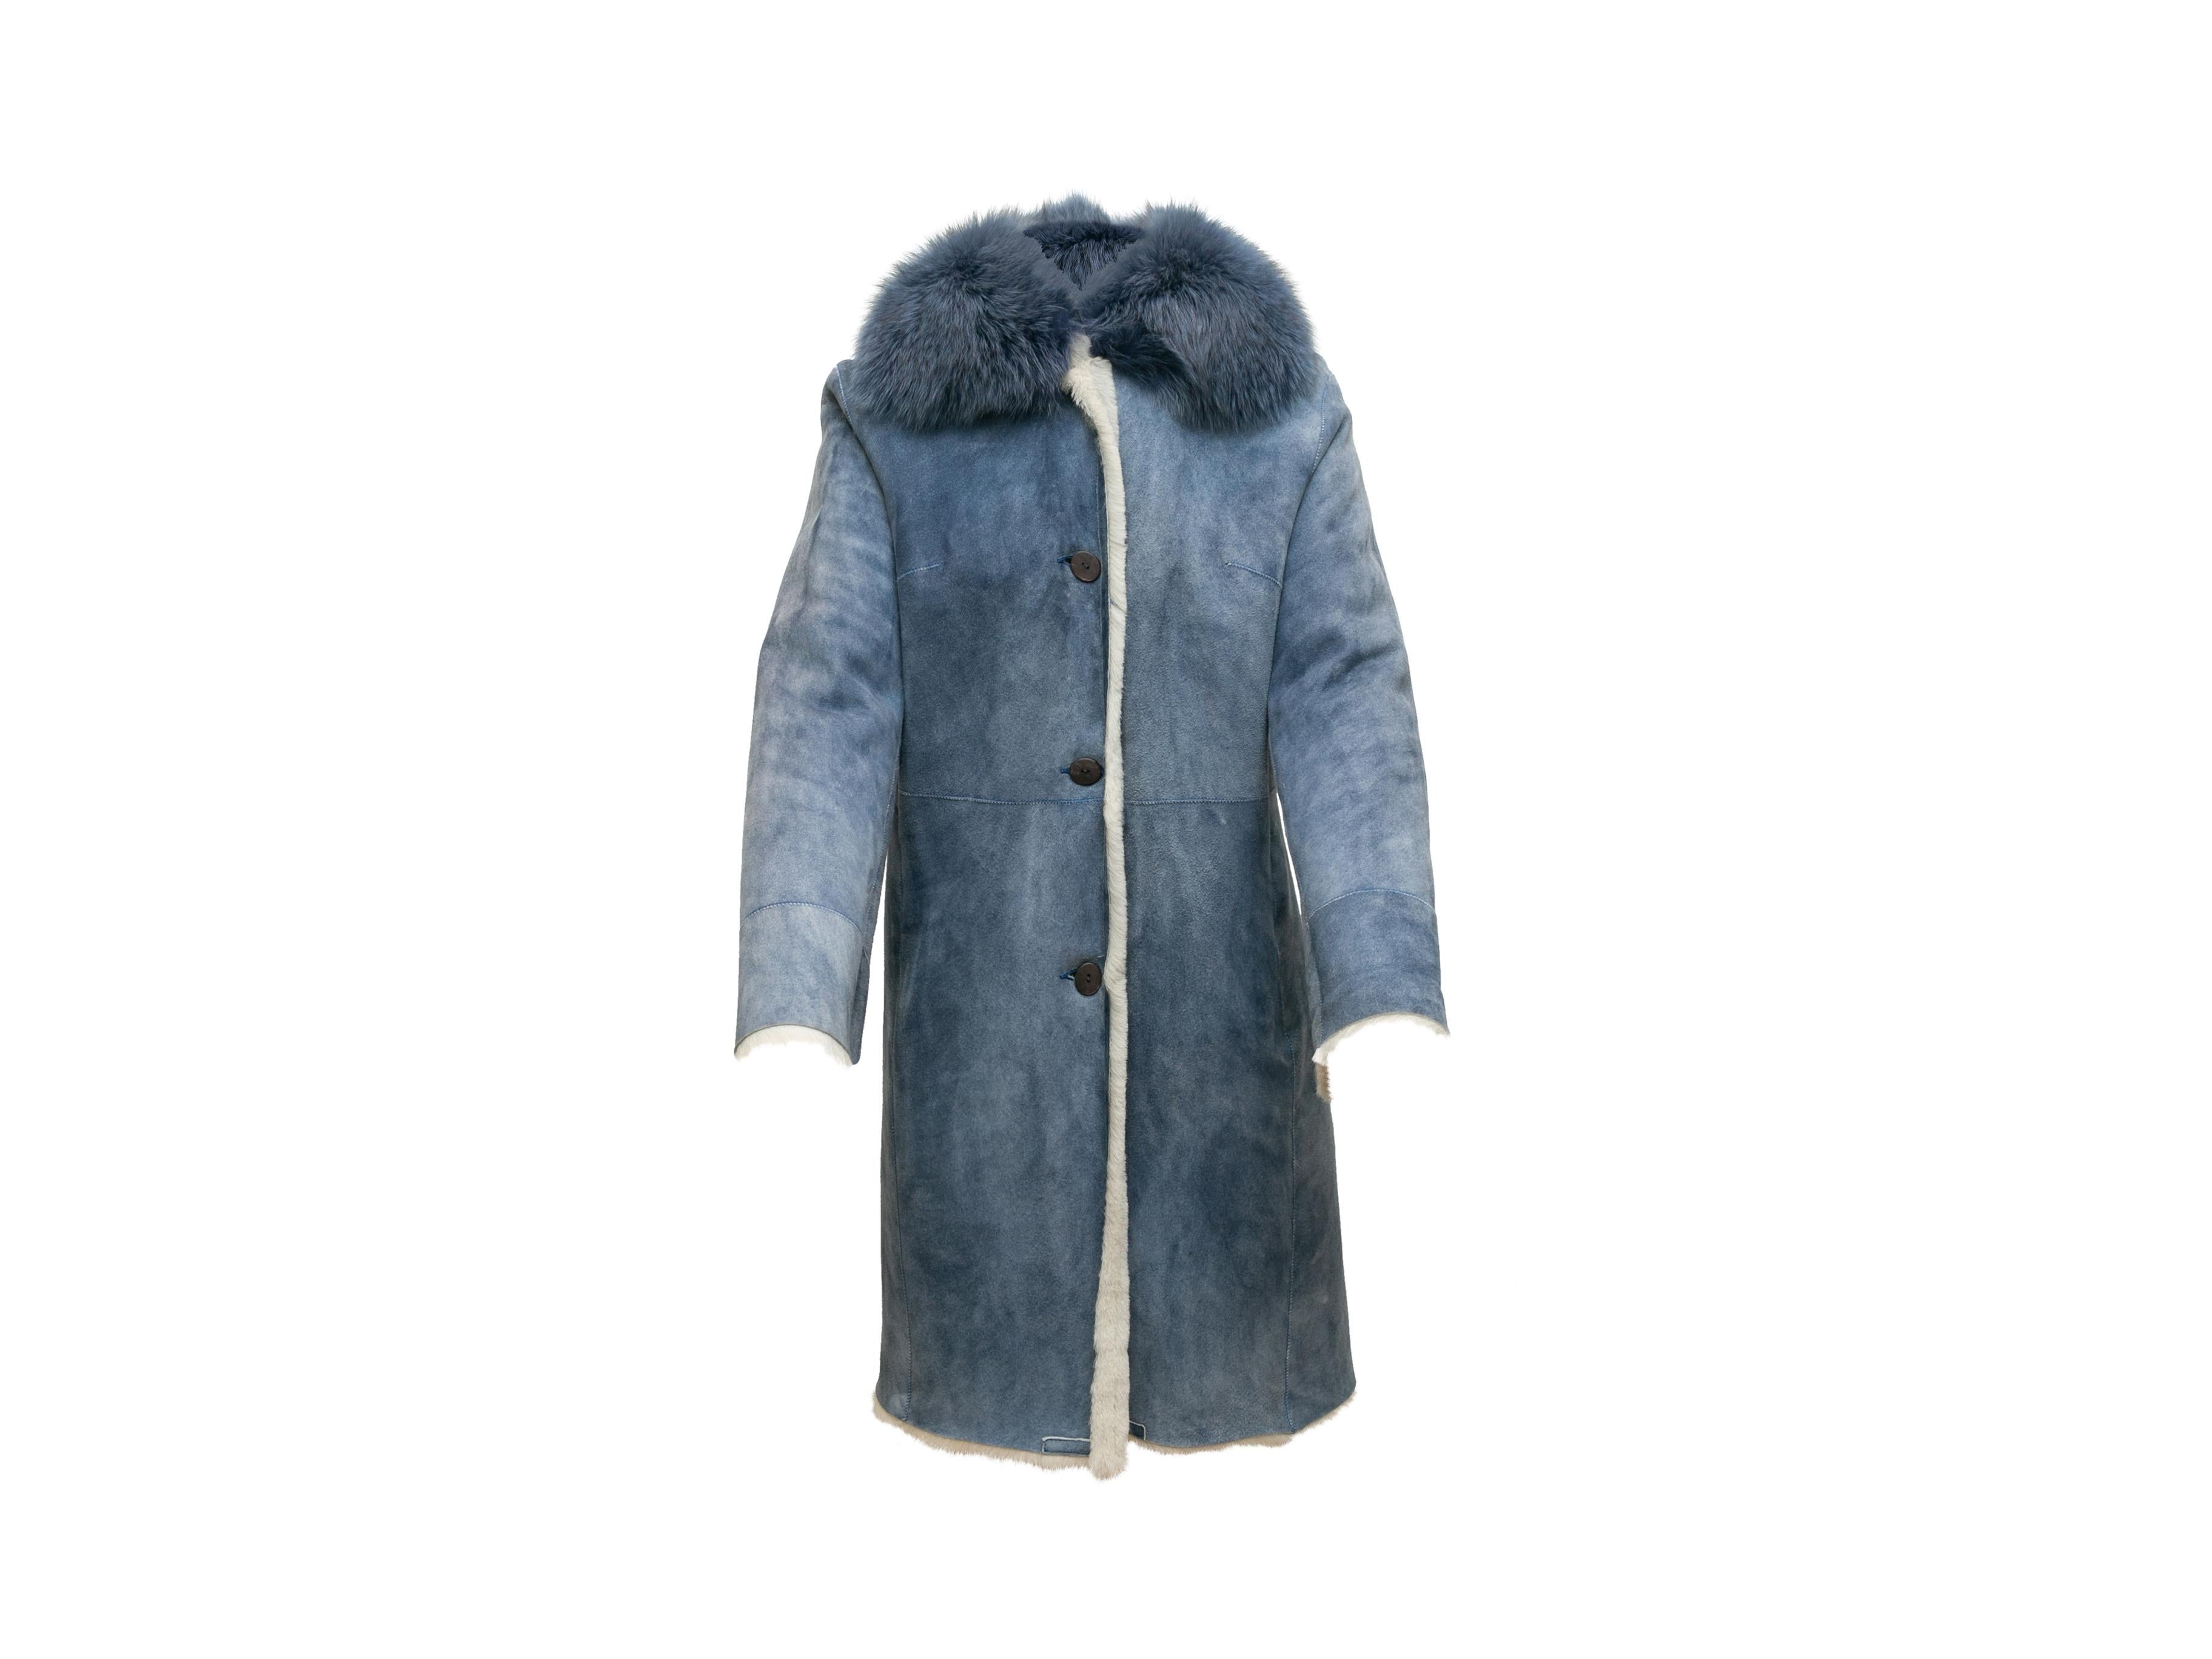 Product details: Blue and white shearling reversible belted coat by Toscana. Fox fur collar. Button closures at front. 39